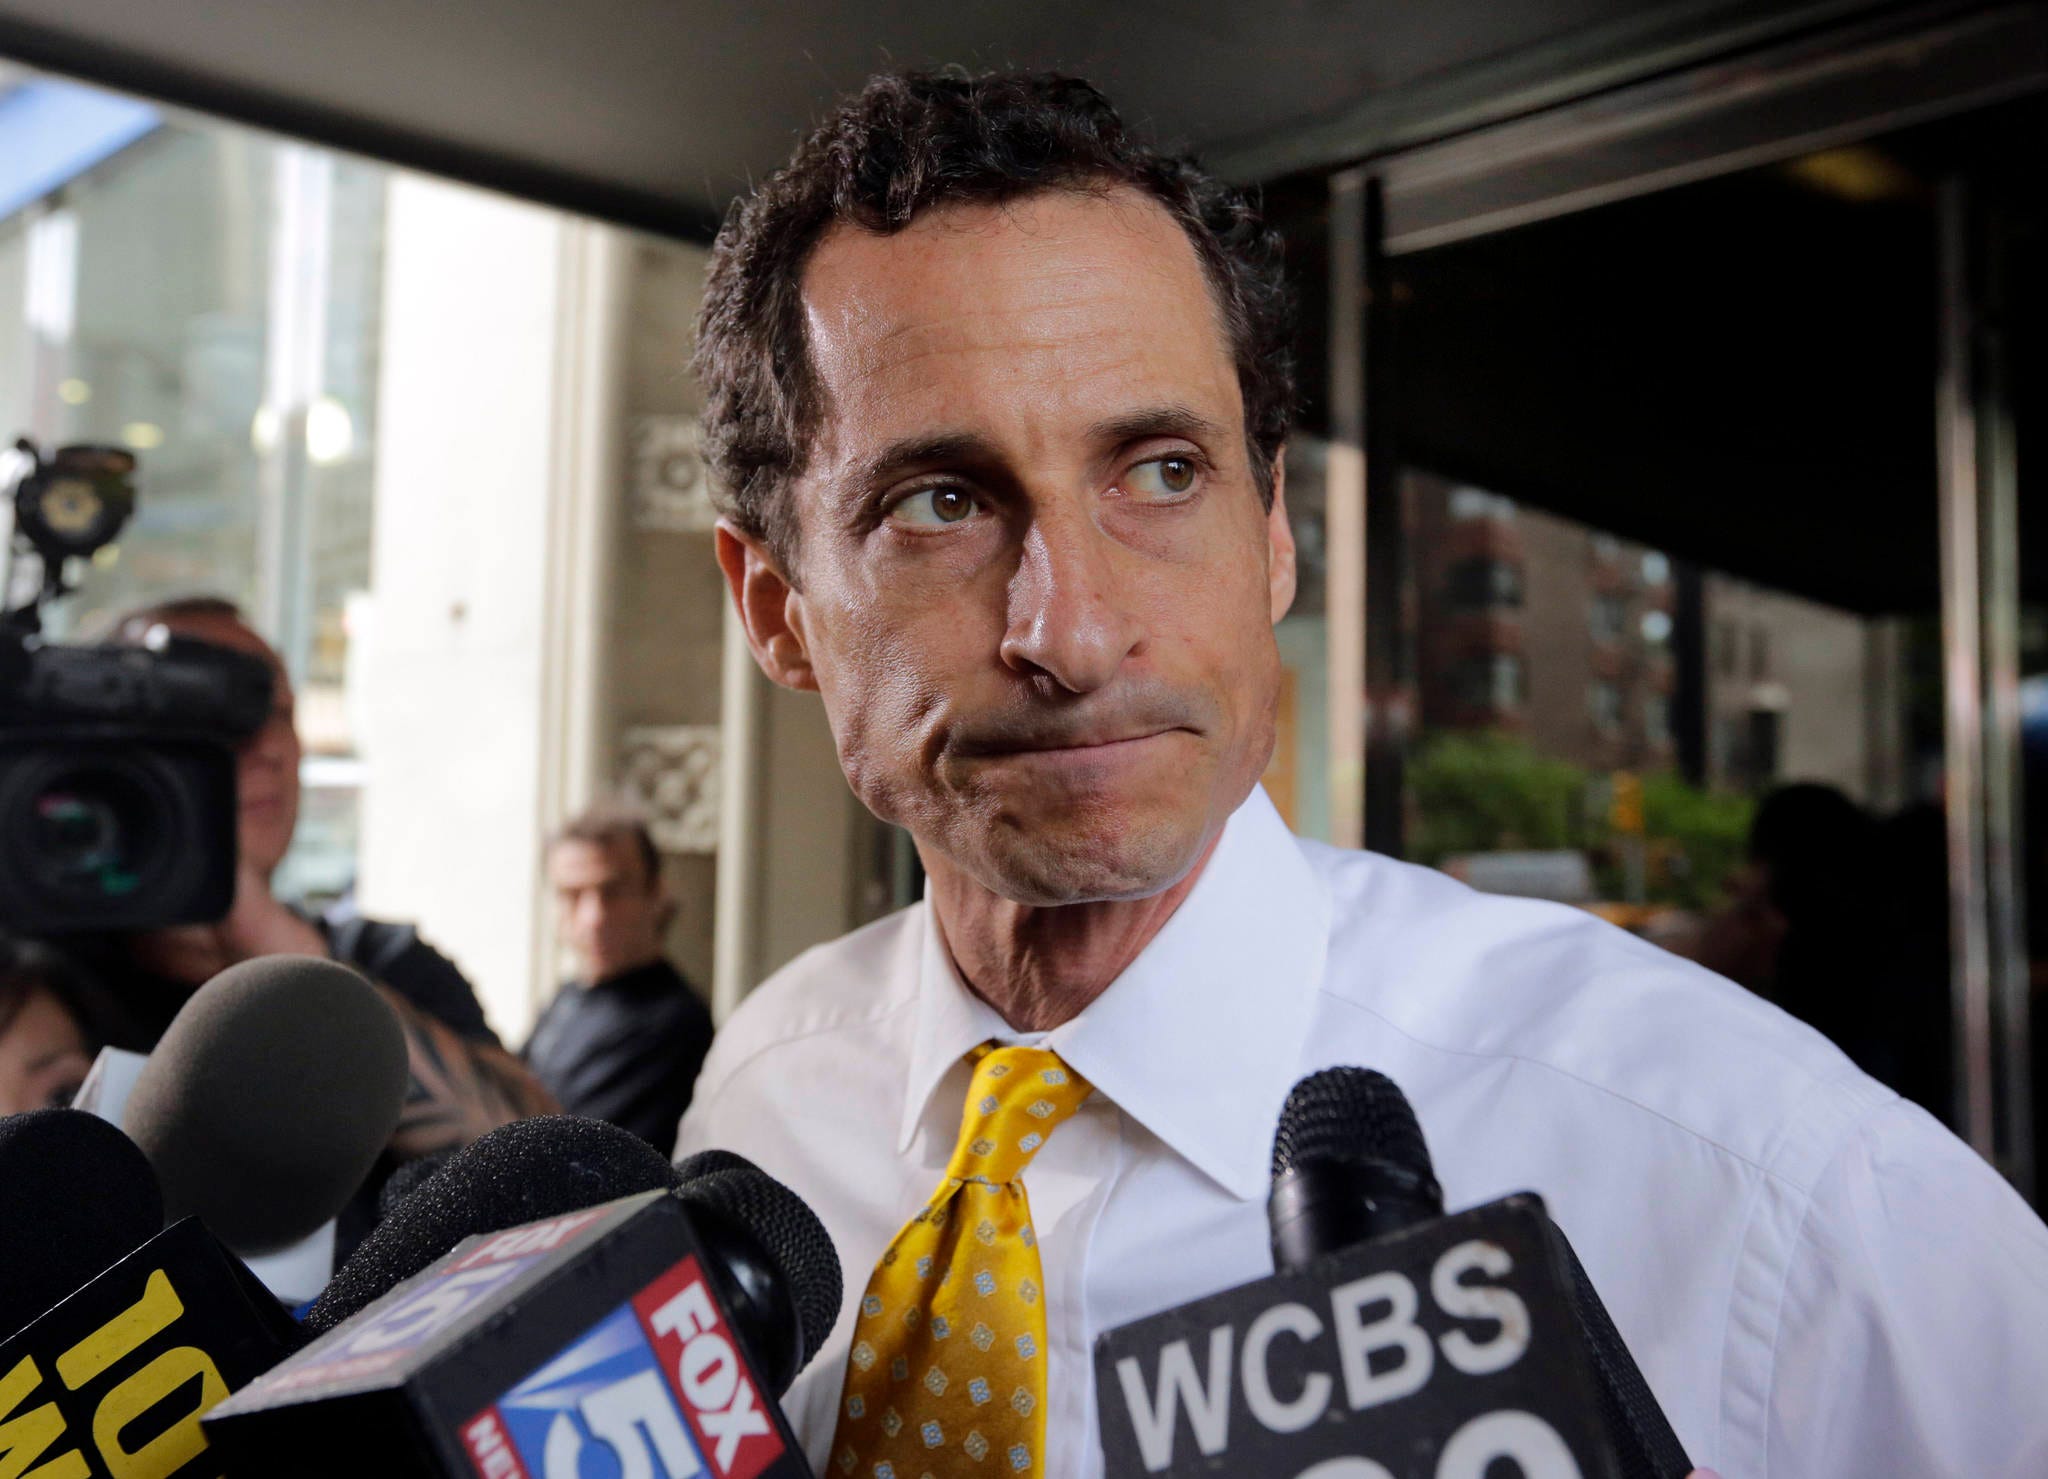 Weiner faces jail time for sending adult porn to girl, 15